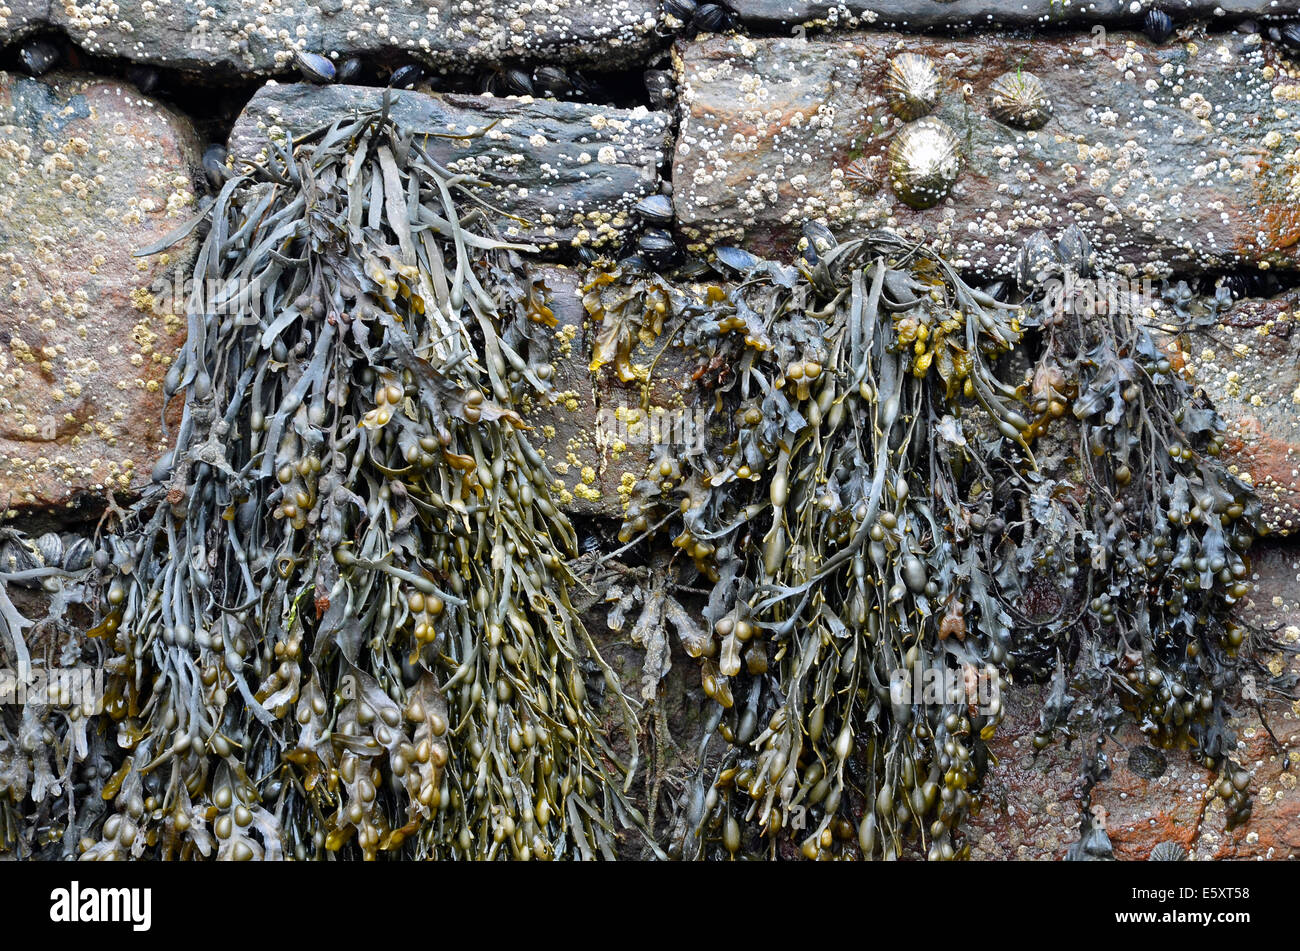 Bladder wrack seaweed, limpets and barnacles hanging from the harbour wall in Mullaghmore harbour, County Sligo, Ireland Stock Photo